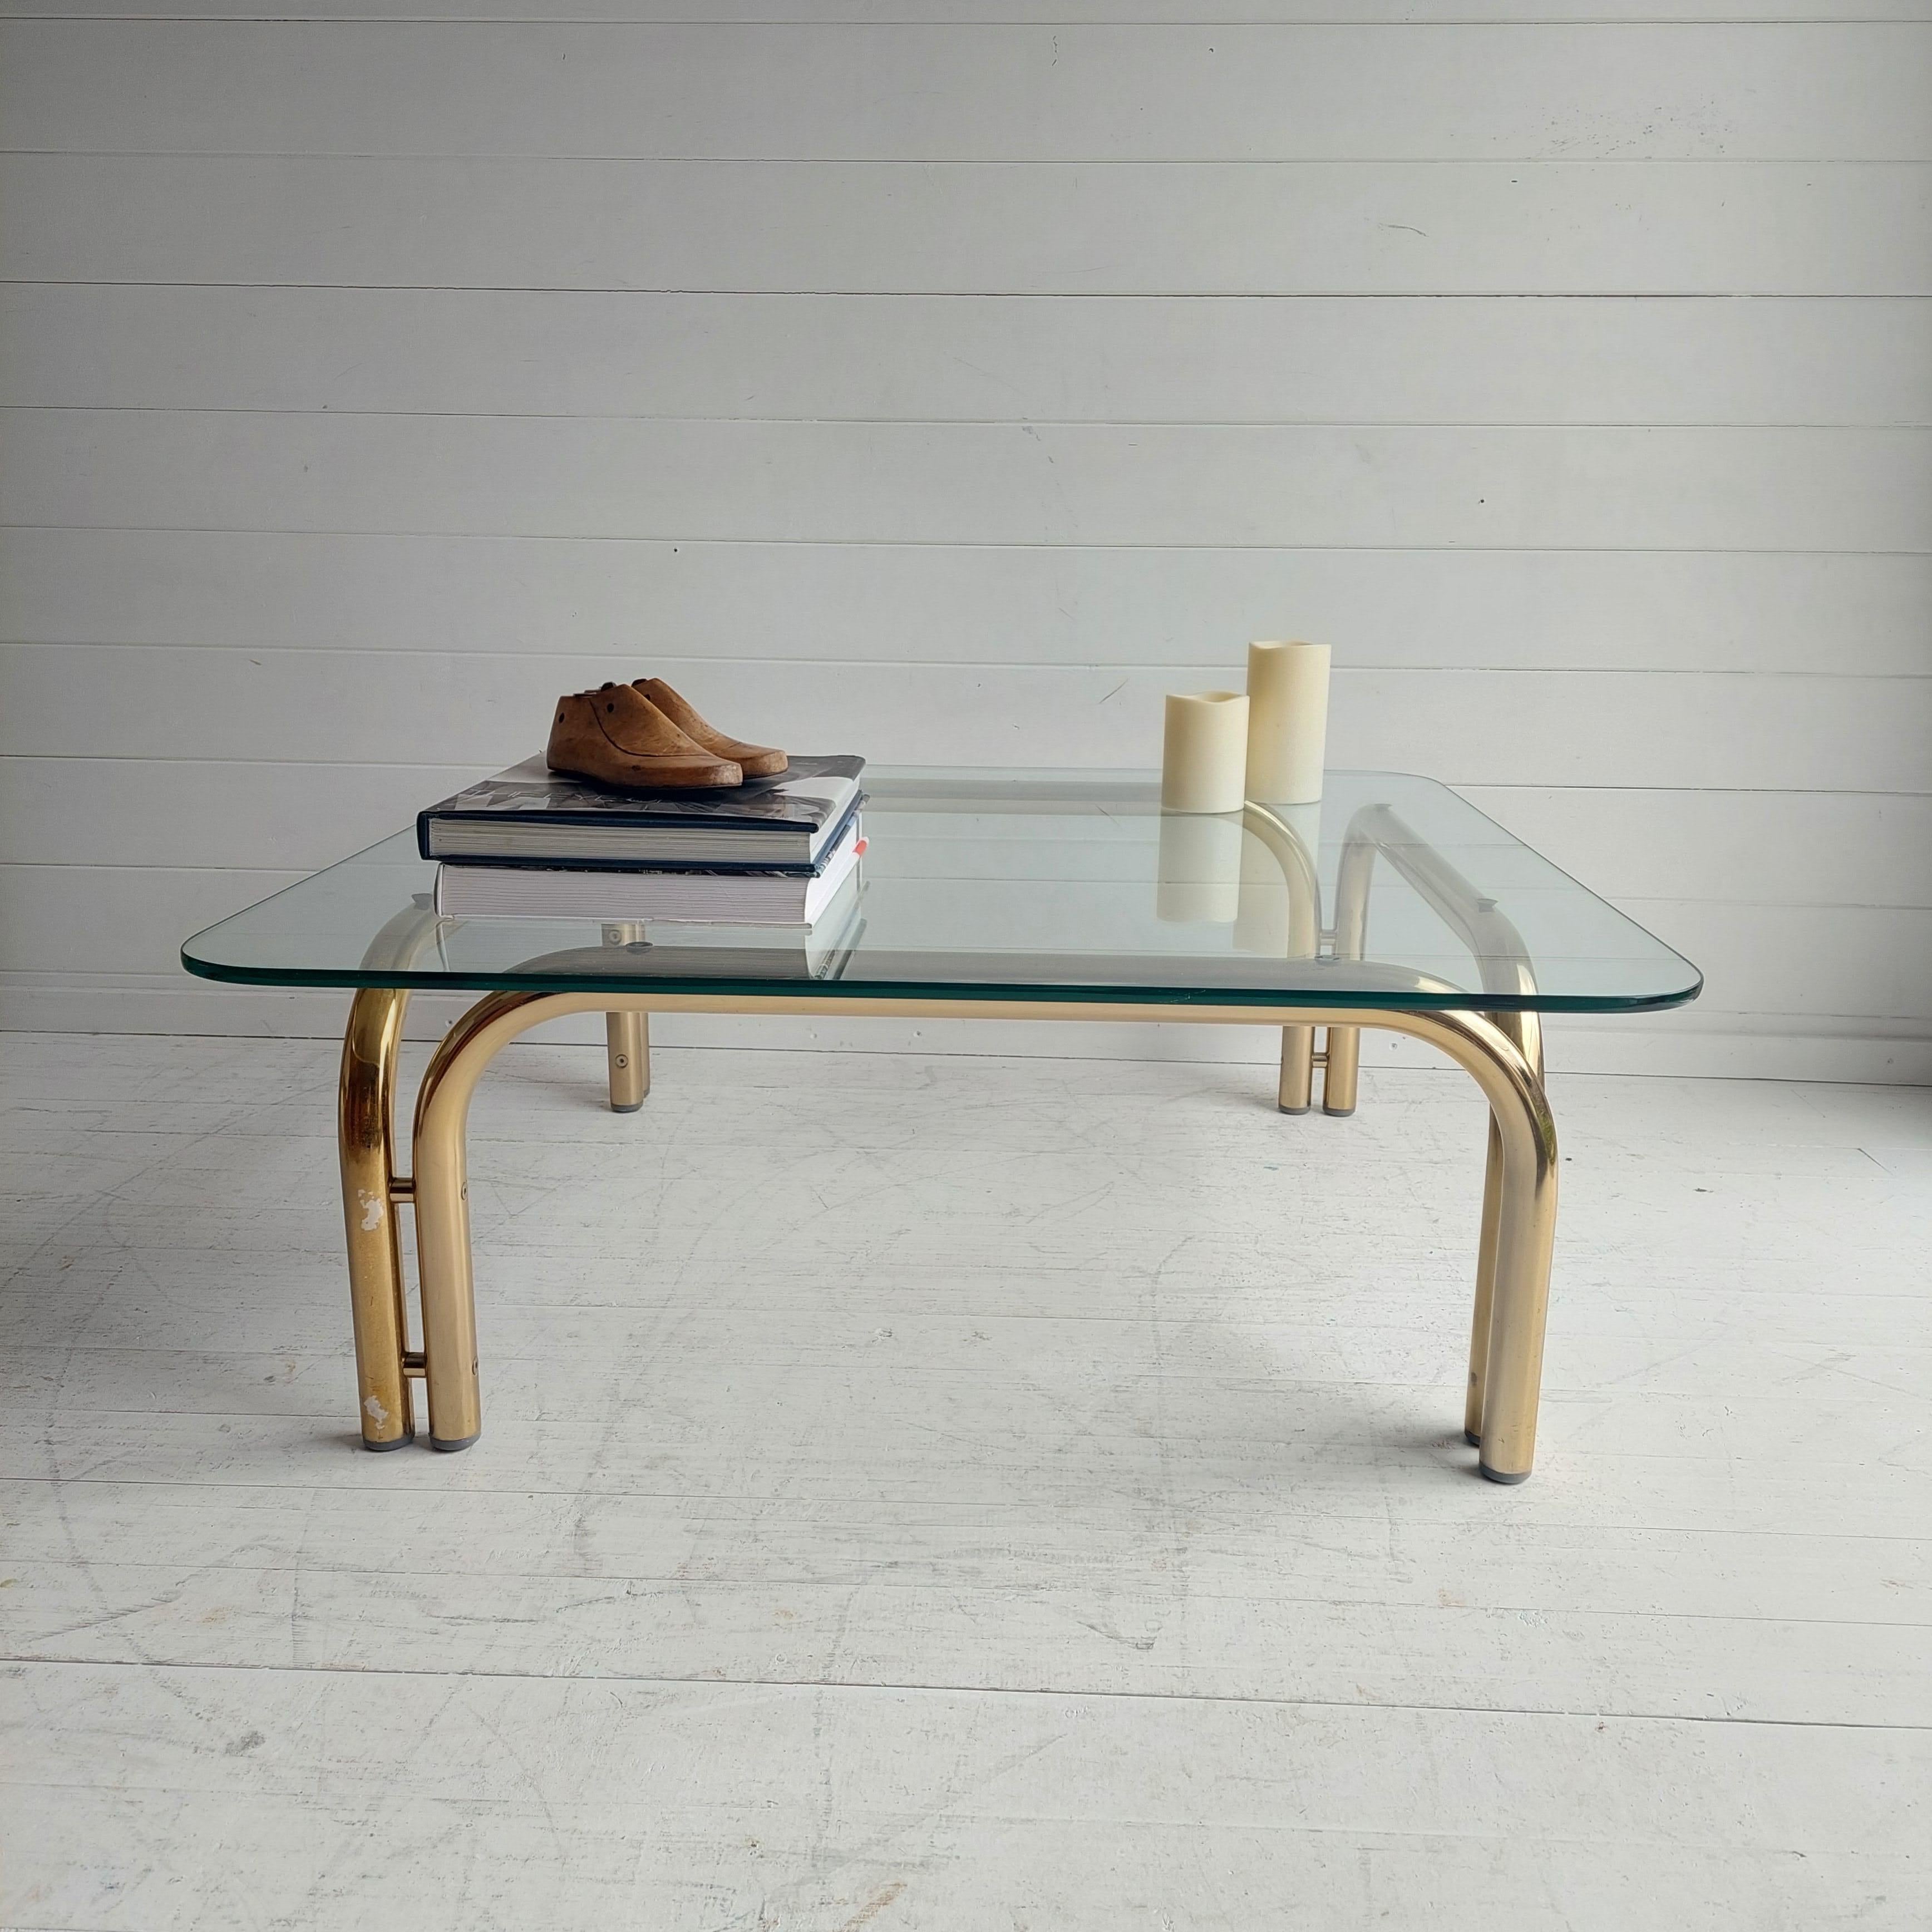 A rare example fron Tim Bates for Pieff Mid-Century Modern Gilded chrome & clear glass coffee table.
A remarkable large square coffee table, designed by Tim Bates for English manufacturer Pieff.

Having a thick toughened smoked glass top (0.8cm)